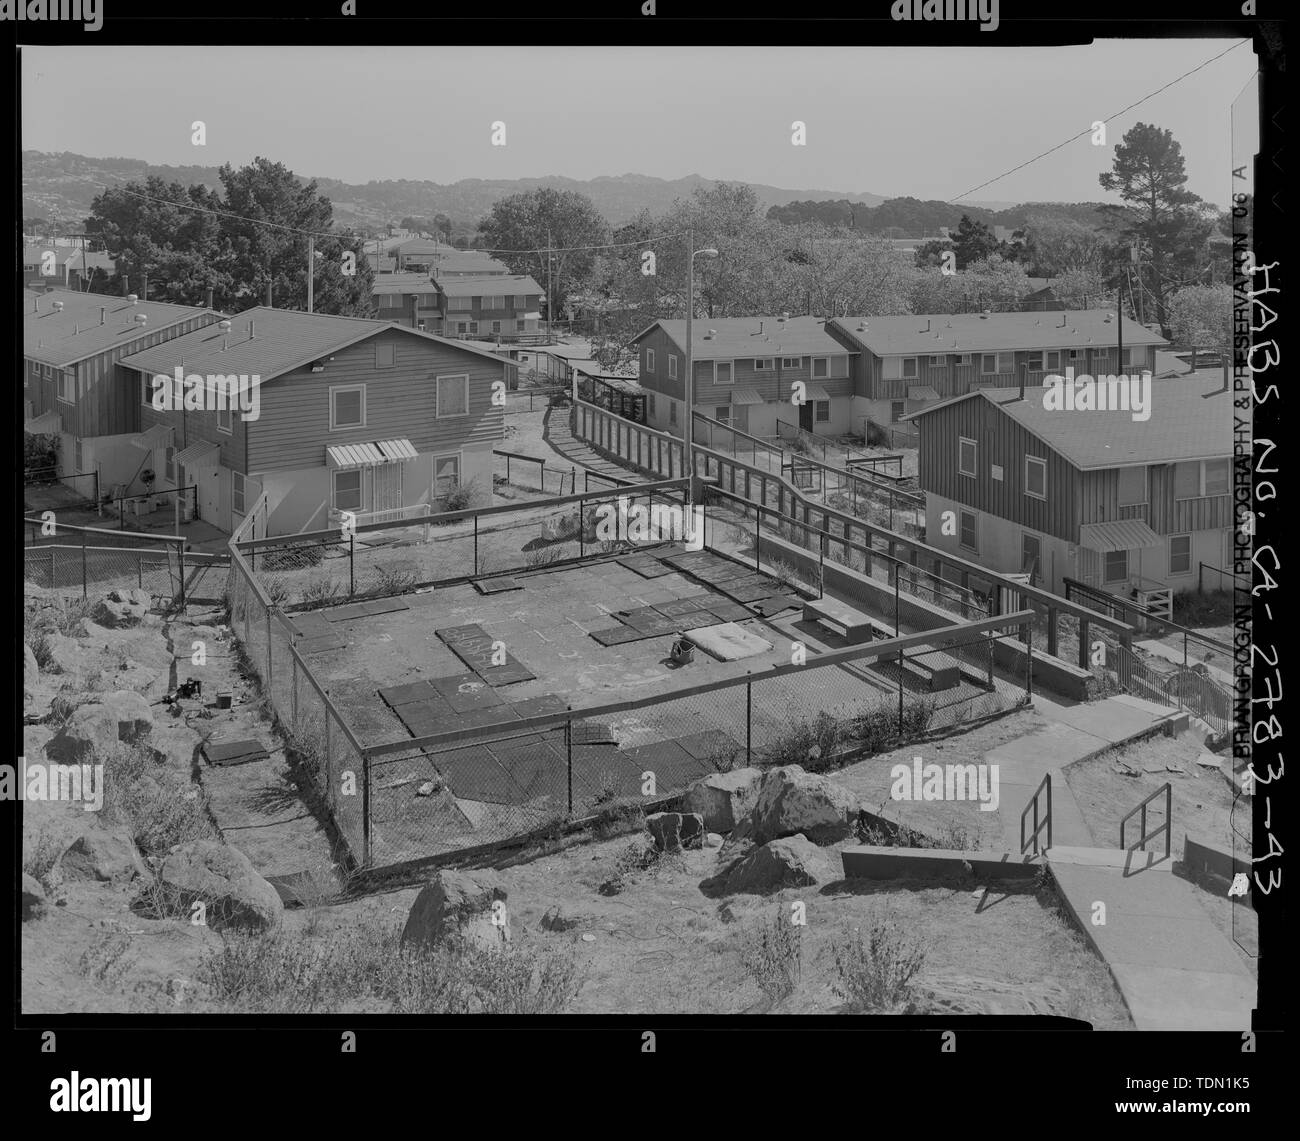 Part 2 of 3 of panorama with HABS CA-2783-42 and HABS CA-2783-44. View of Easter Hill site as seen from balcony of Building No. 31. Building No. 19 on left, Building No. 17 at left rear, Building No. 12 at right rear, Building No. 10 at right. Note boulders on hillside. Playground at center is a later addition. Looking east - Easter Hill Village, Bordered by South Twenty-sixth Street, South Twenty-eighth Street, Hinkley Avenue, Foothill Avenue and Corto Square, Richmond, Contra Costa County, CA Stock Photo